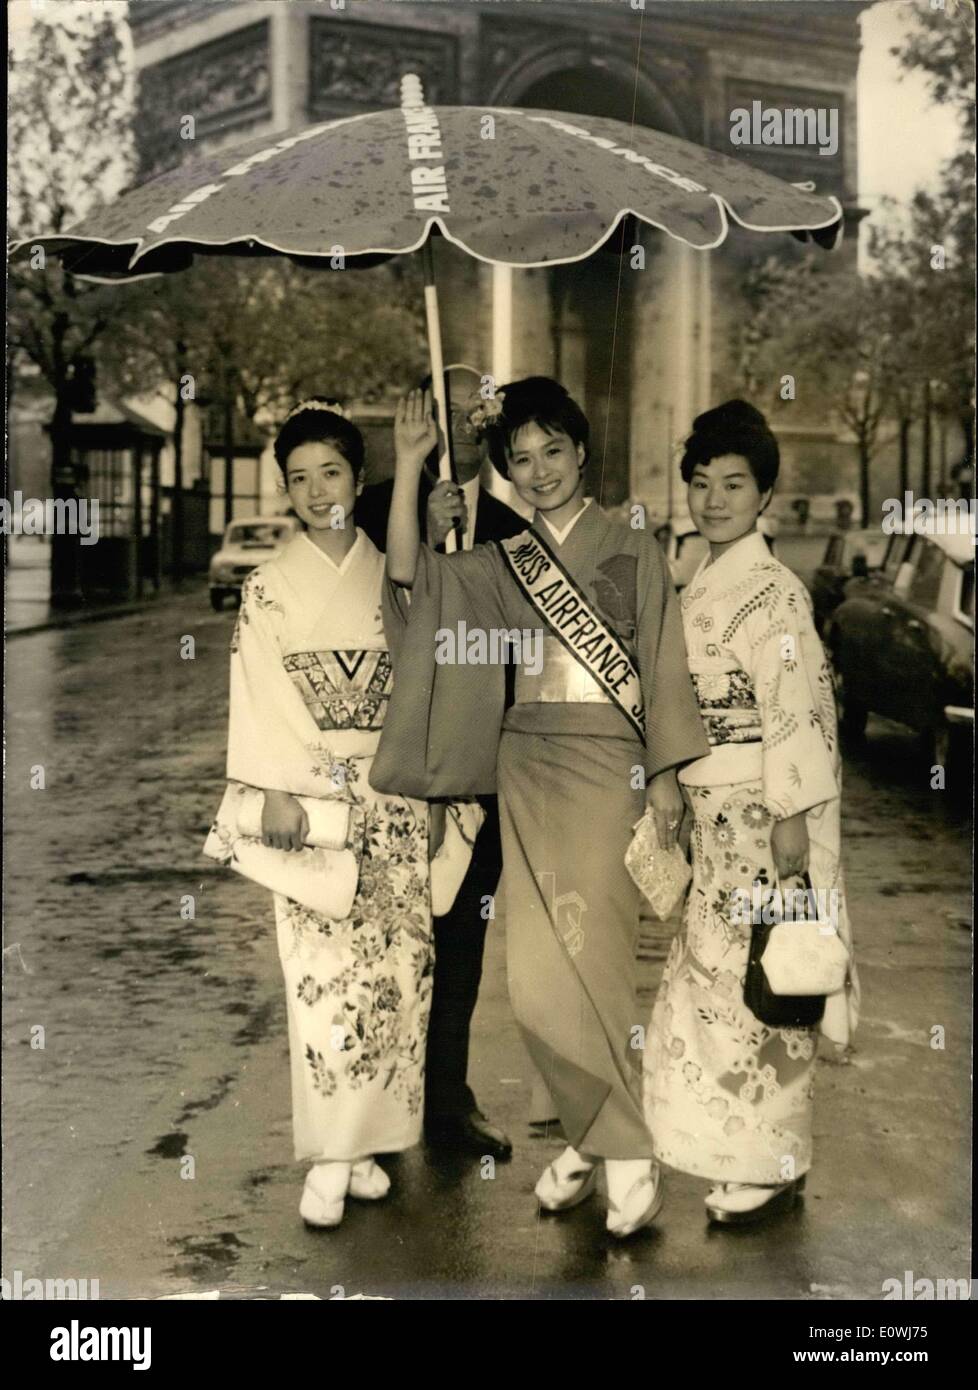 May 23, 1963 - In Japan, the beauty contest are always important evens, but the title of 'Miss Air France Japan' is the most sought after. The contest is organized by a large movie production company along with Air France. The prettiest Japanese girl elected to the 1963 title is Melle Sumiko Oyaizu, 20; she modeled for a large fashion company. During her time as Miss Air France Japan, she was invited to tour Paris and France. She arrived this morning, accompanied by two friends. Here is Melle Sumiko with Suzuki Fumiko (left) and Matsuoka Fukiko (right) Stock Photo